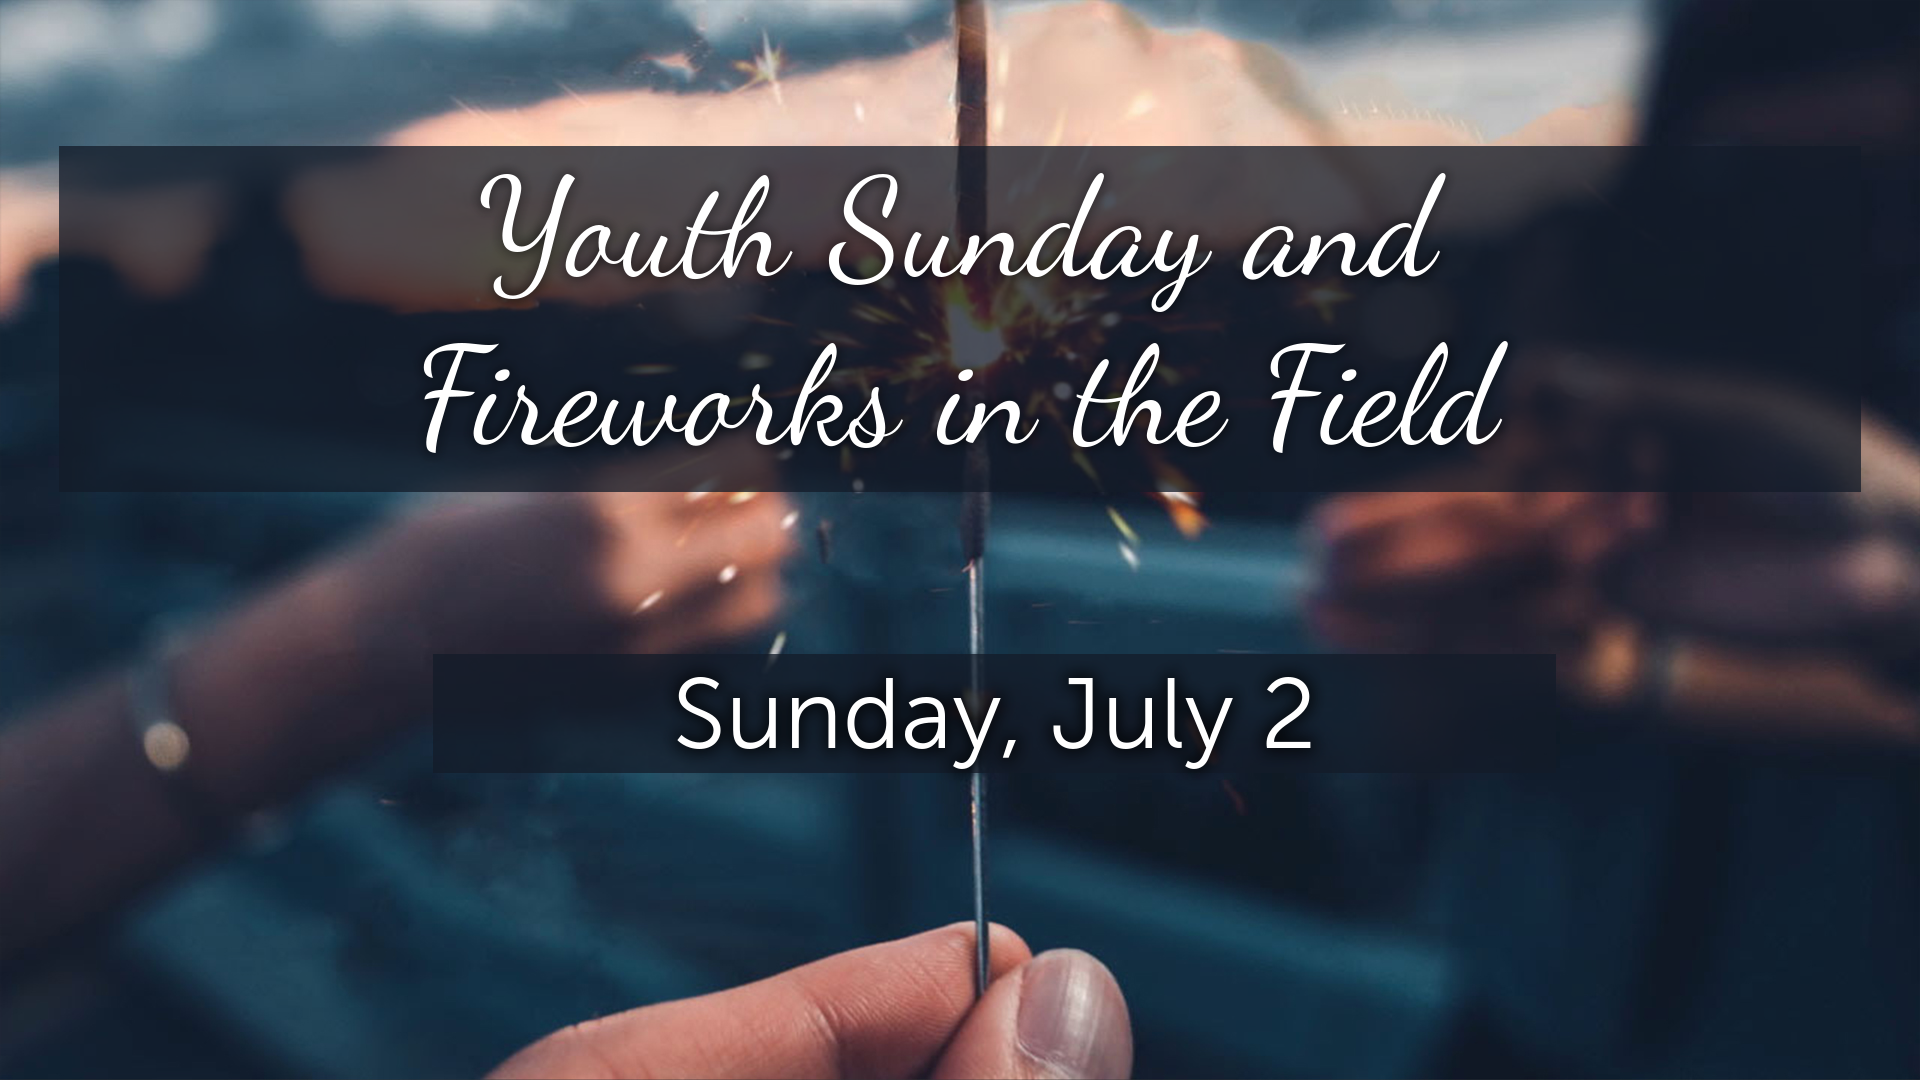 2305-Youth-Sunday-and-Fireworks